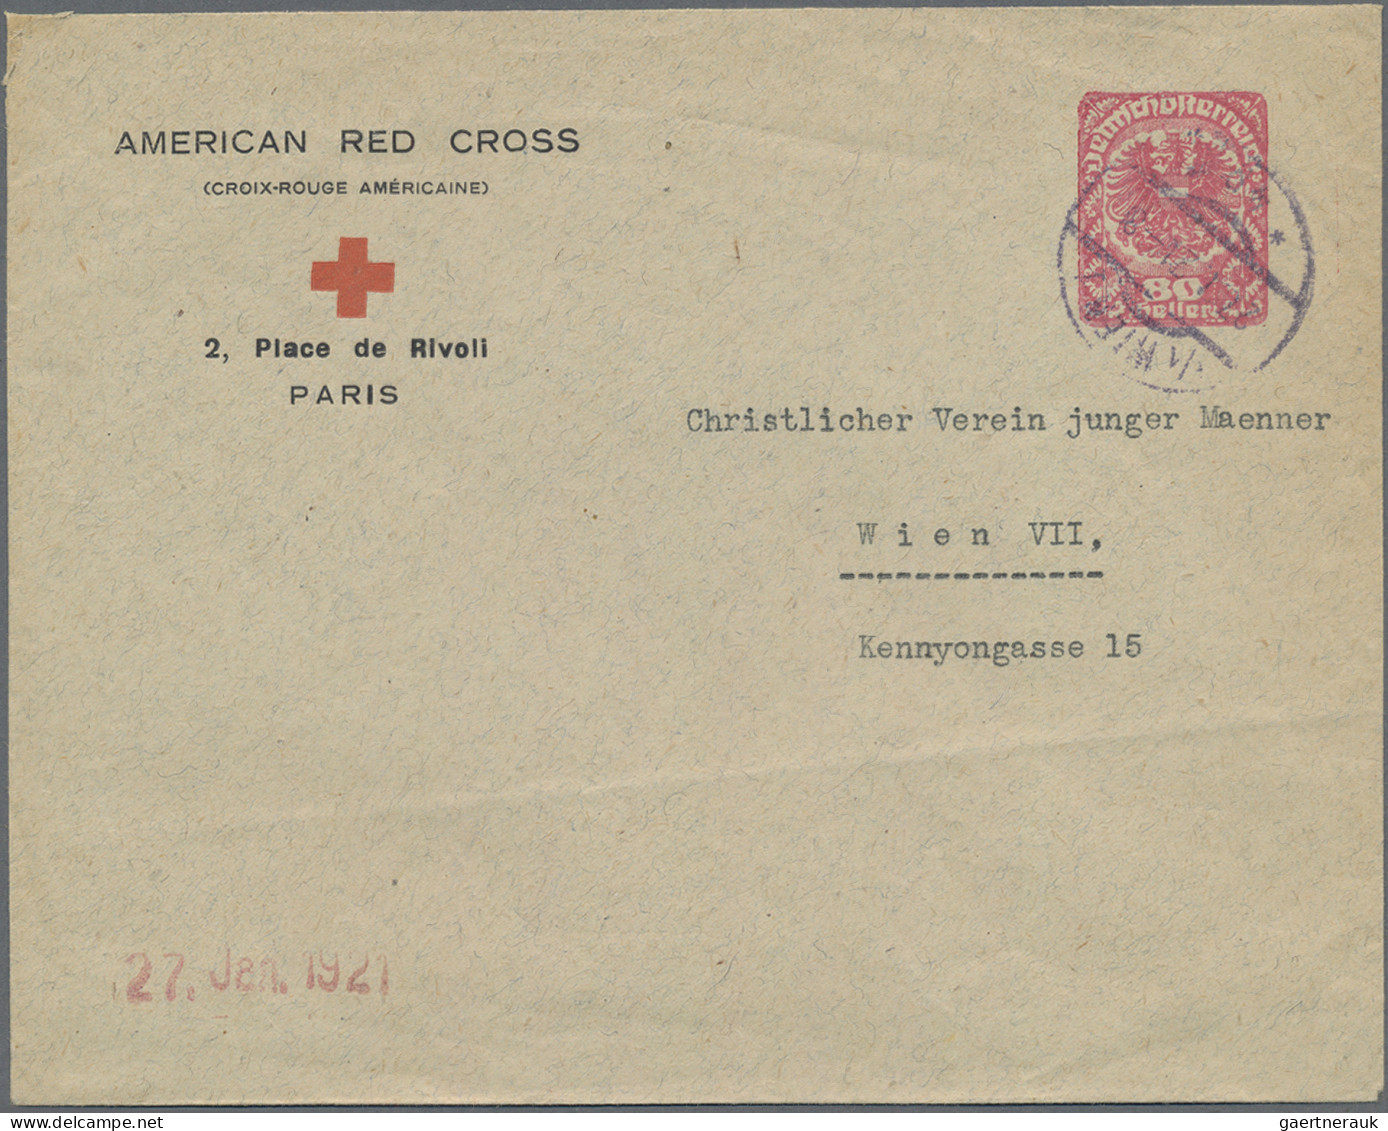 Thematics: Red Cross: 1921, "AMERICAN RED CROSS" (CROIX-ROUGE AMERICAINE) 2, Pla - Red Cross